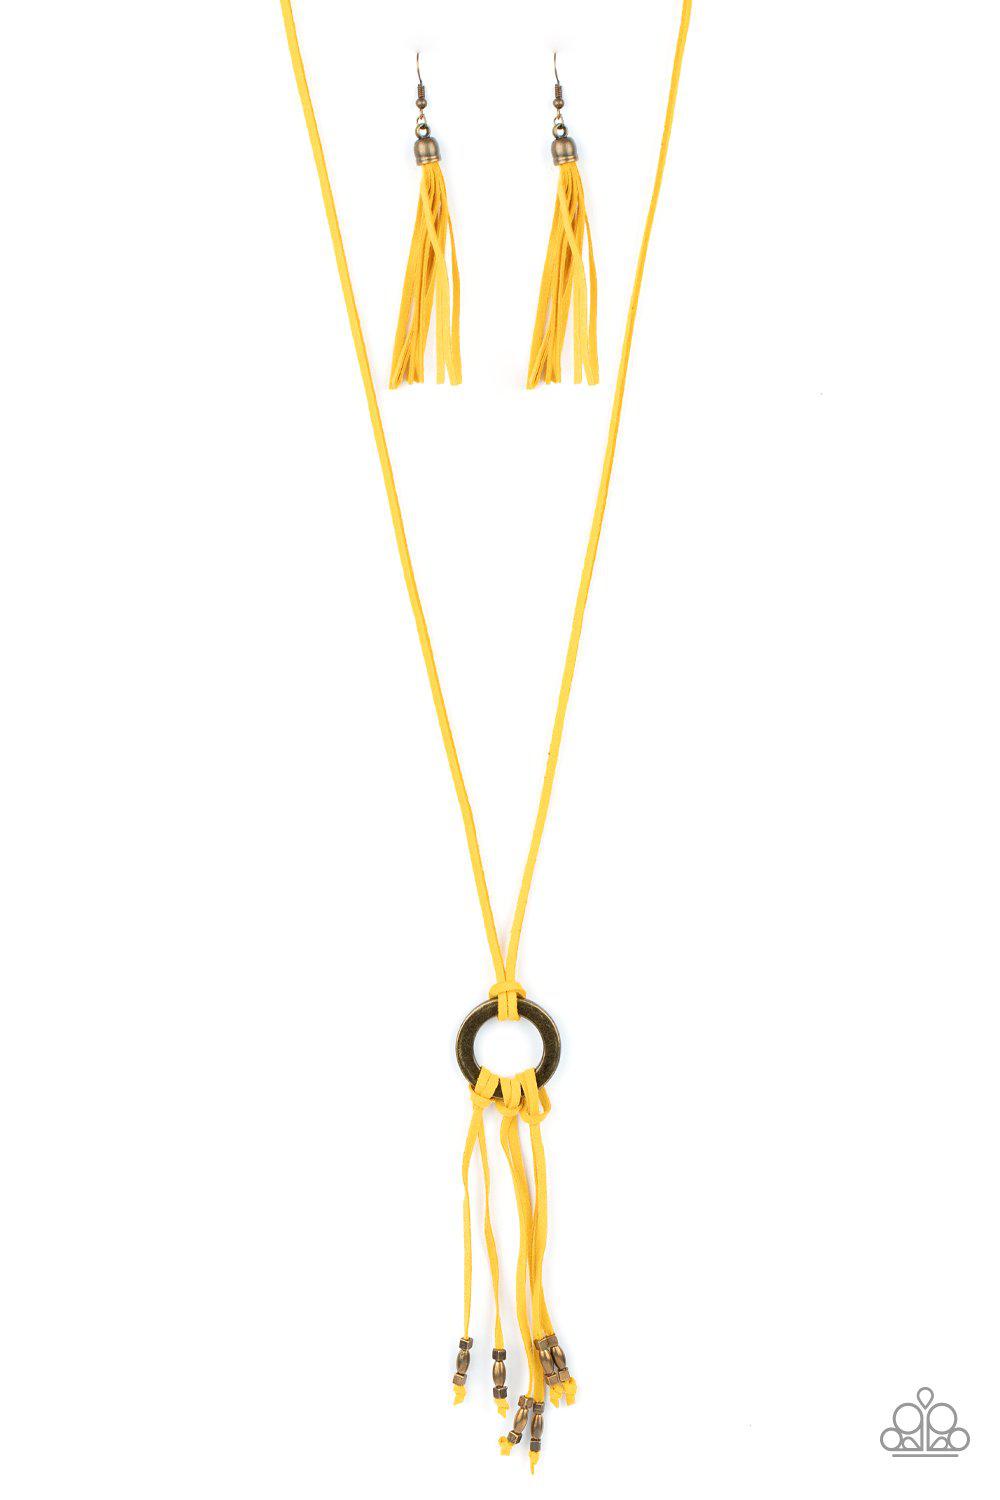 Feel at HOMESPUN Yellow Suede Tassel Necklace - Paparazzi Accessories - lightbox -CarasShop.com - $5 Jewelry by Cara Jewels